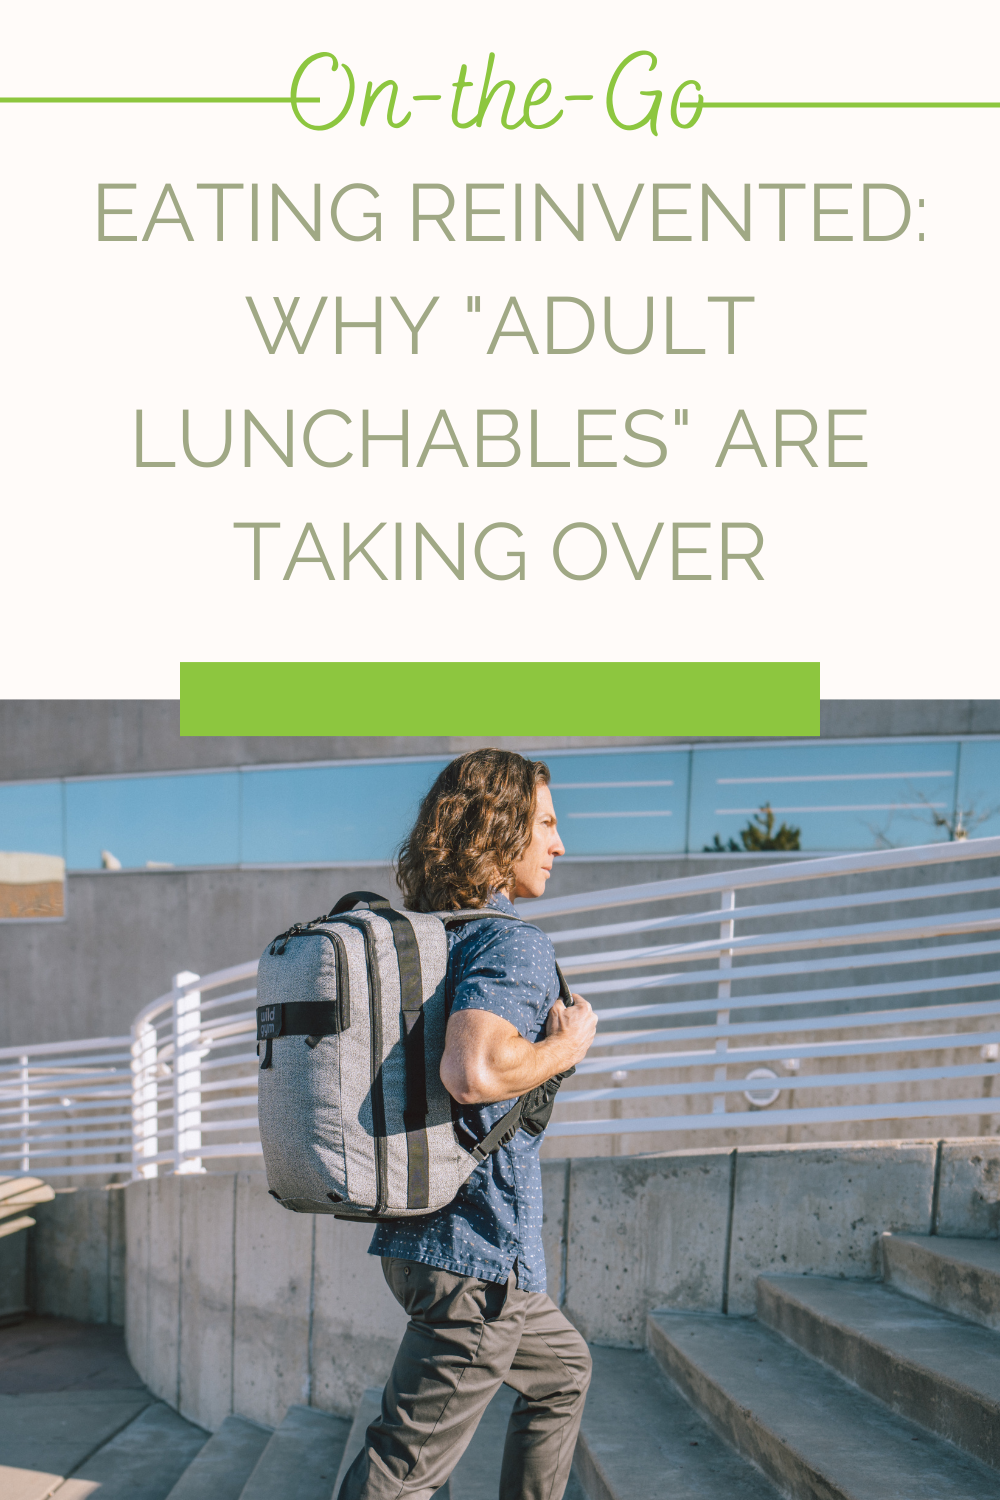 On-the-Go Eating Reinvented: Why "Adult Lunchables" are Taking Over